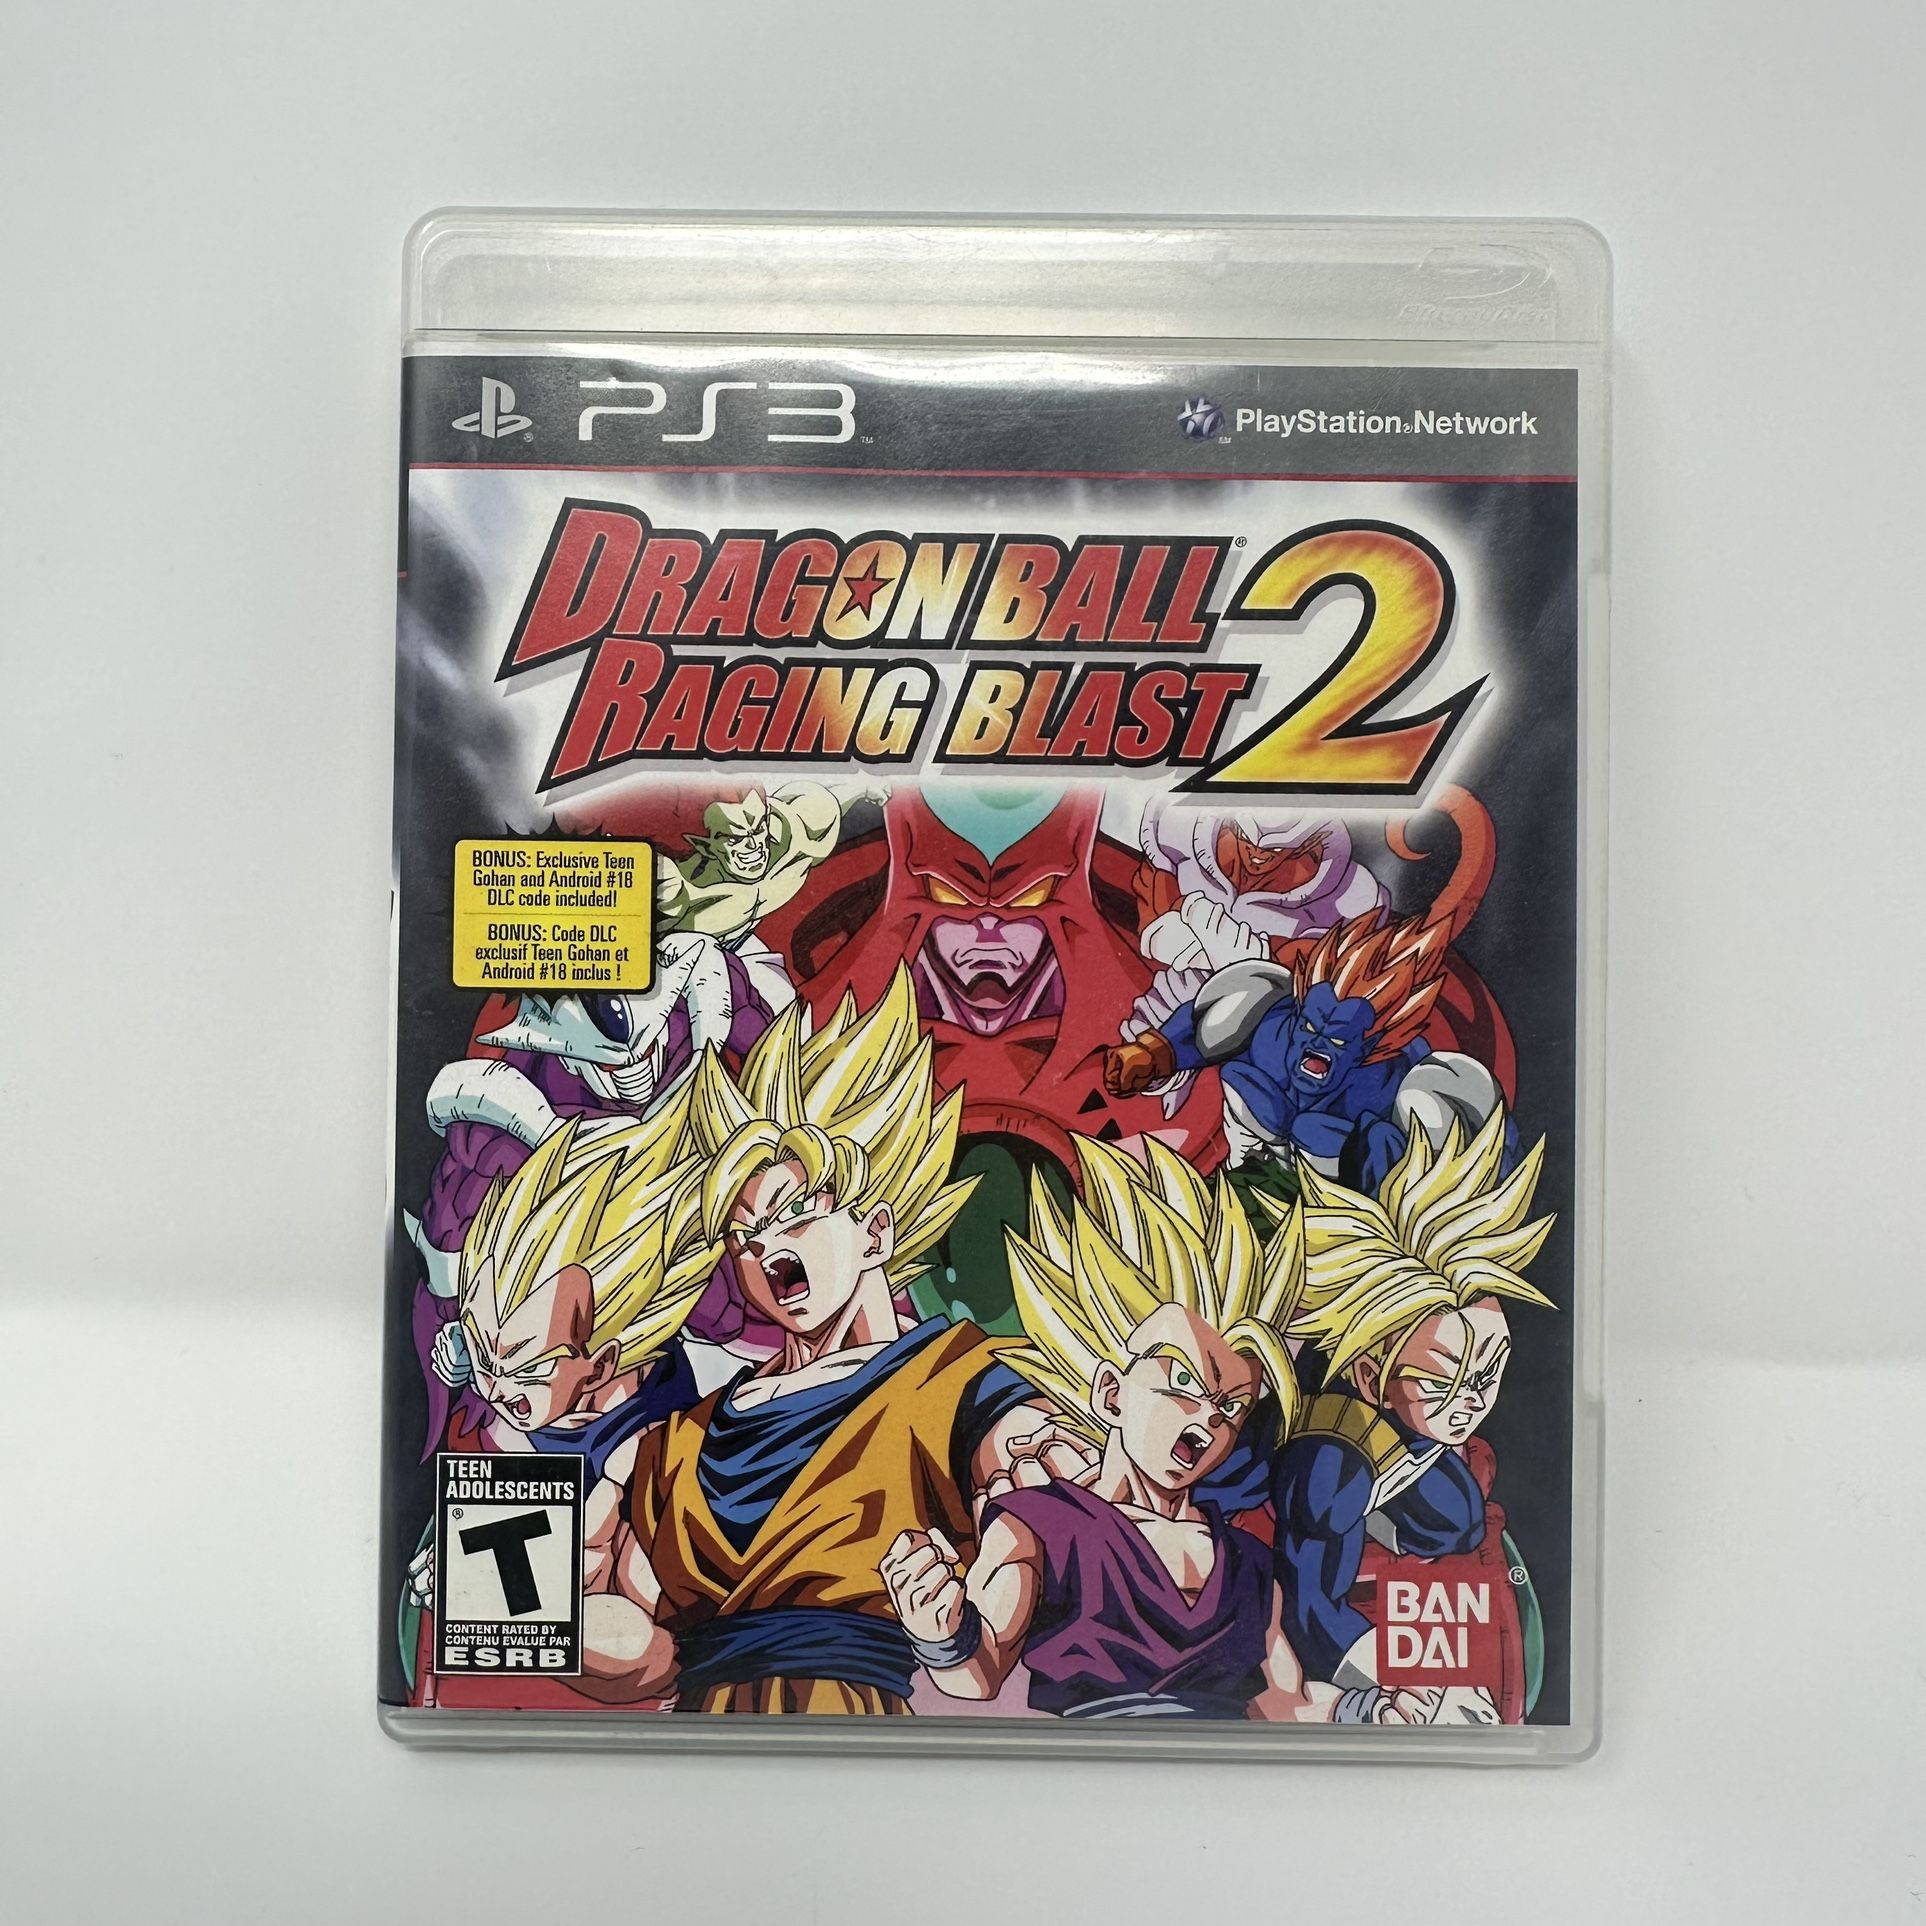 Dragon Ball Z Raging Blast 2 - PlayStation 3 PS3 - Complete - Tested - Authentic